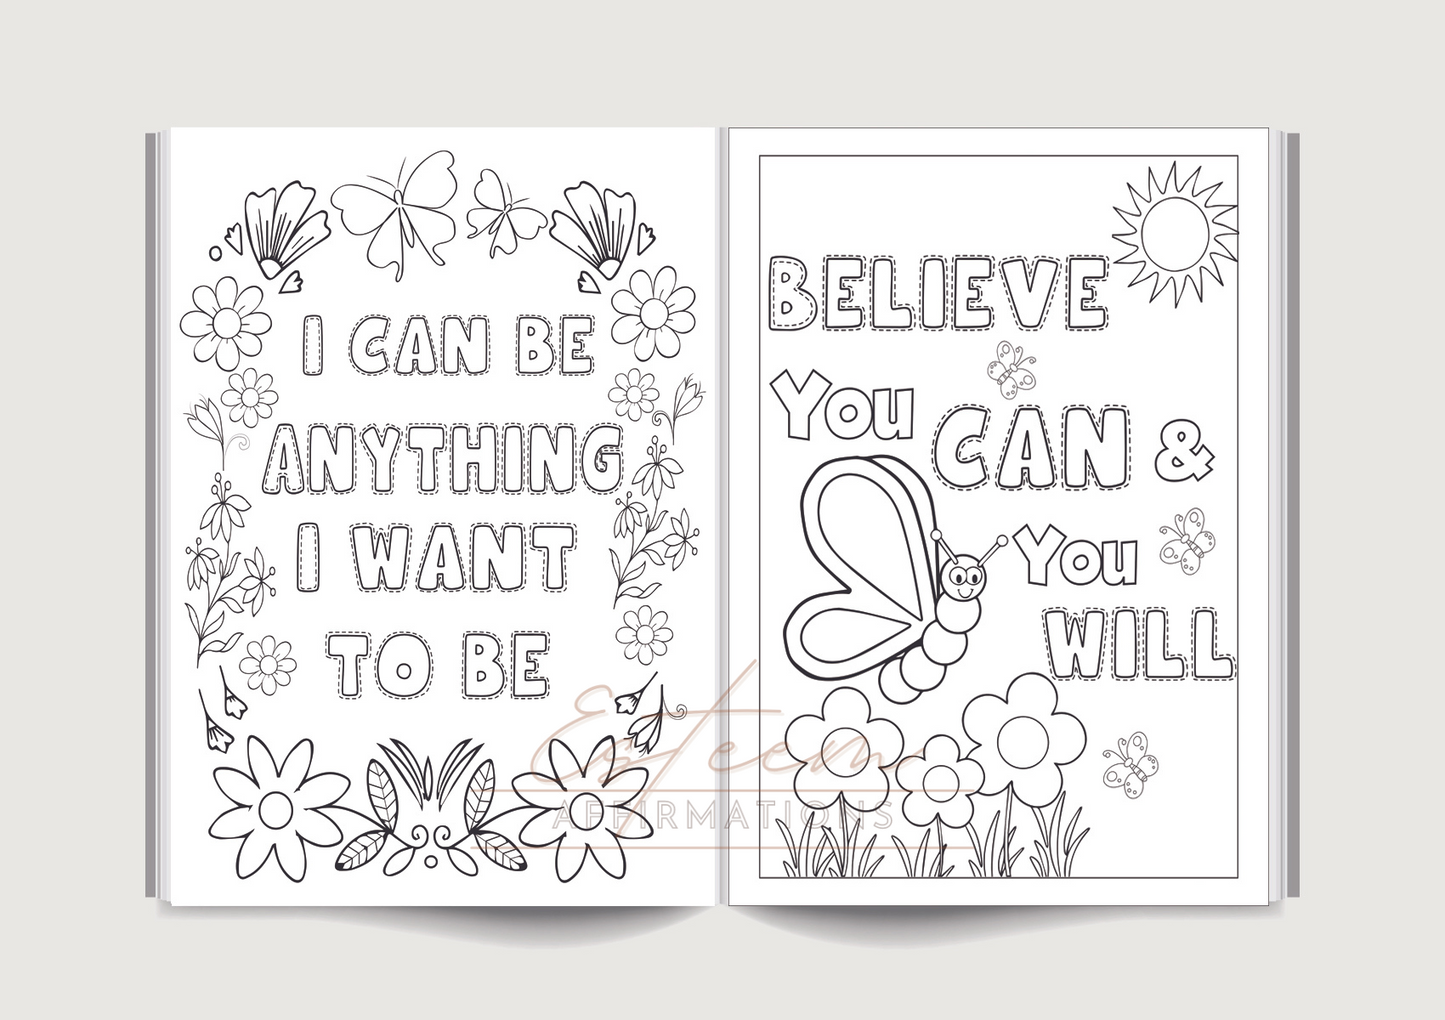 Because I am, I Can - Children's Positive Affirmation Coloring & Activity Book